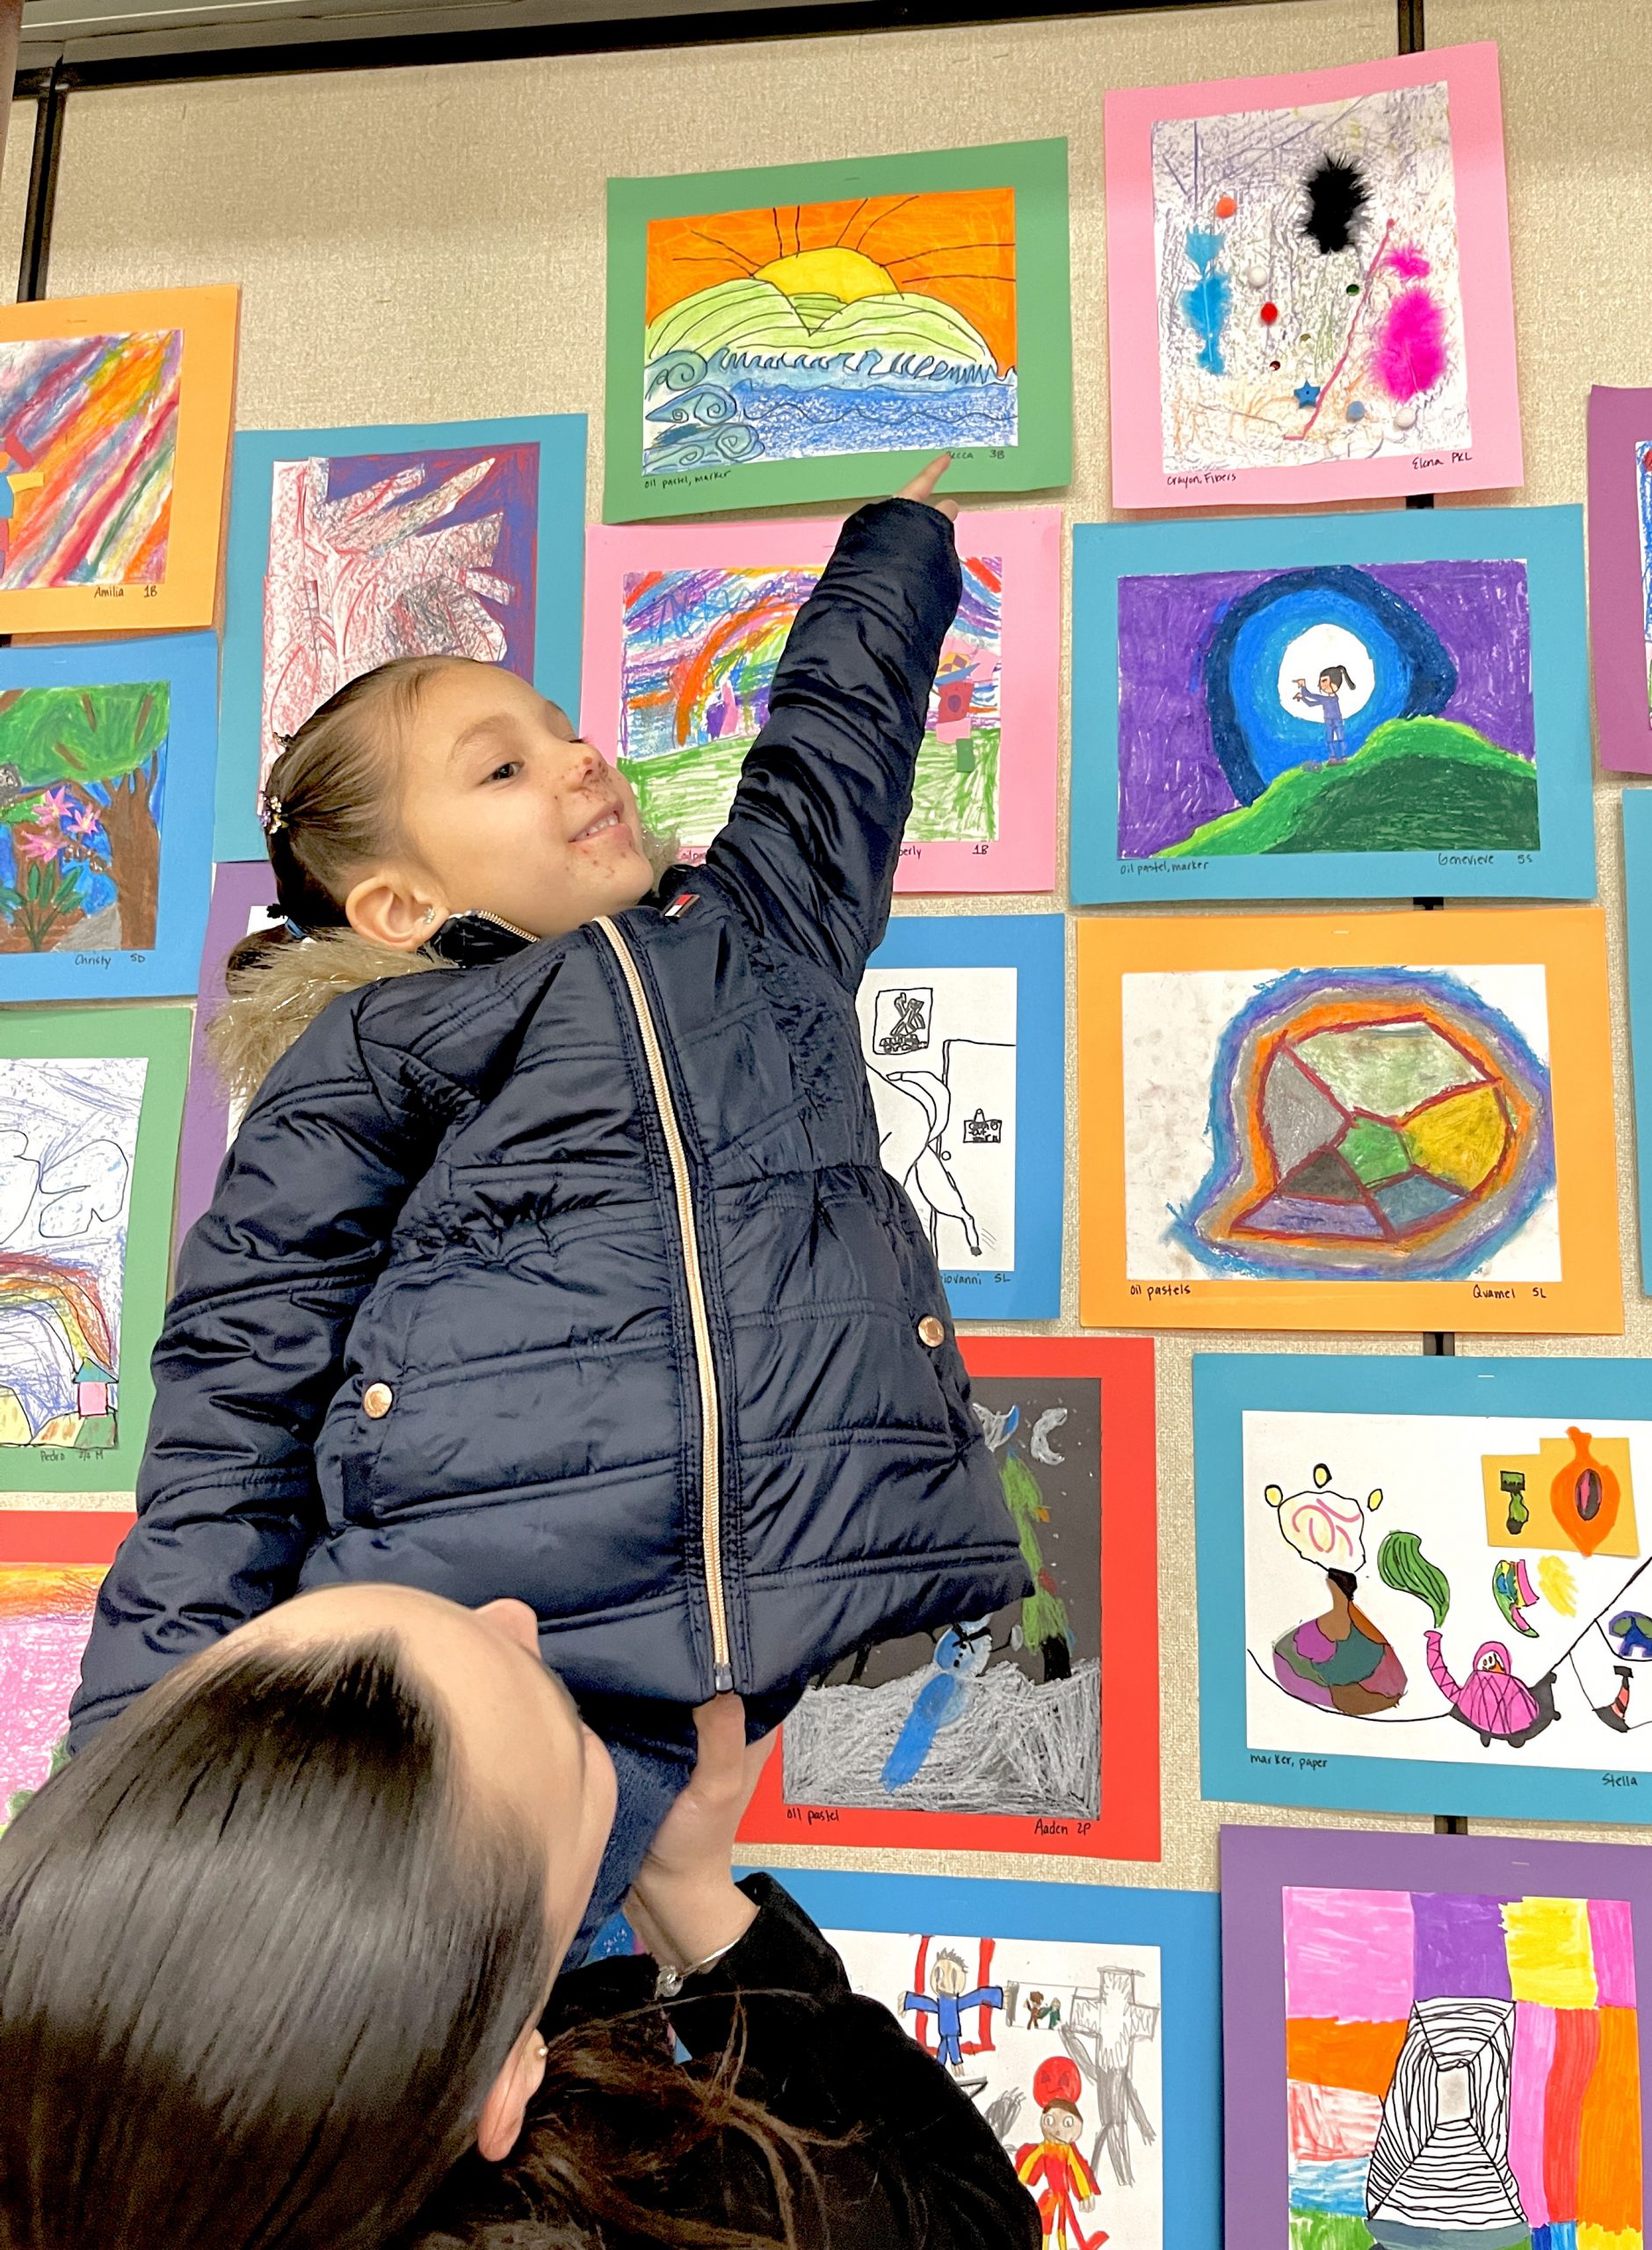 An elementary girl wearing a dark colored jacket points way up high on the wall as a woman holds her up. She is pointing to her artwork on the wall.